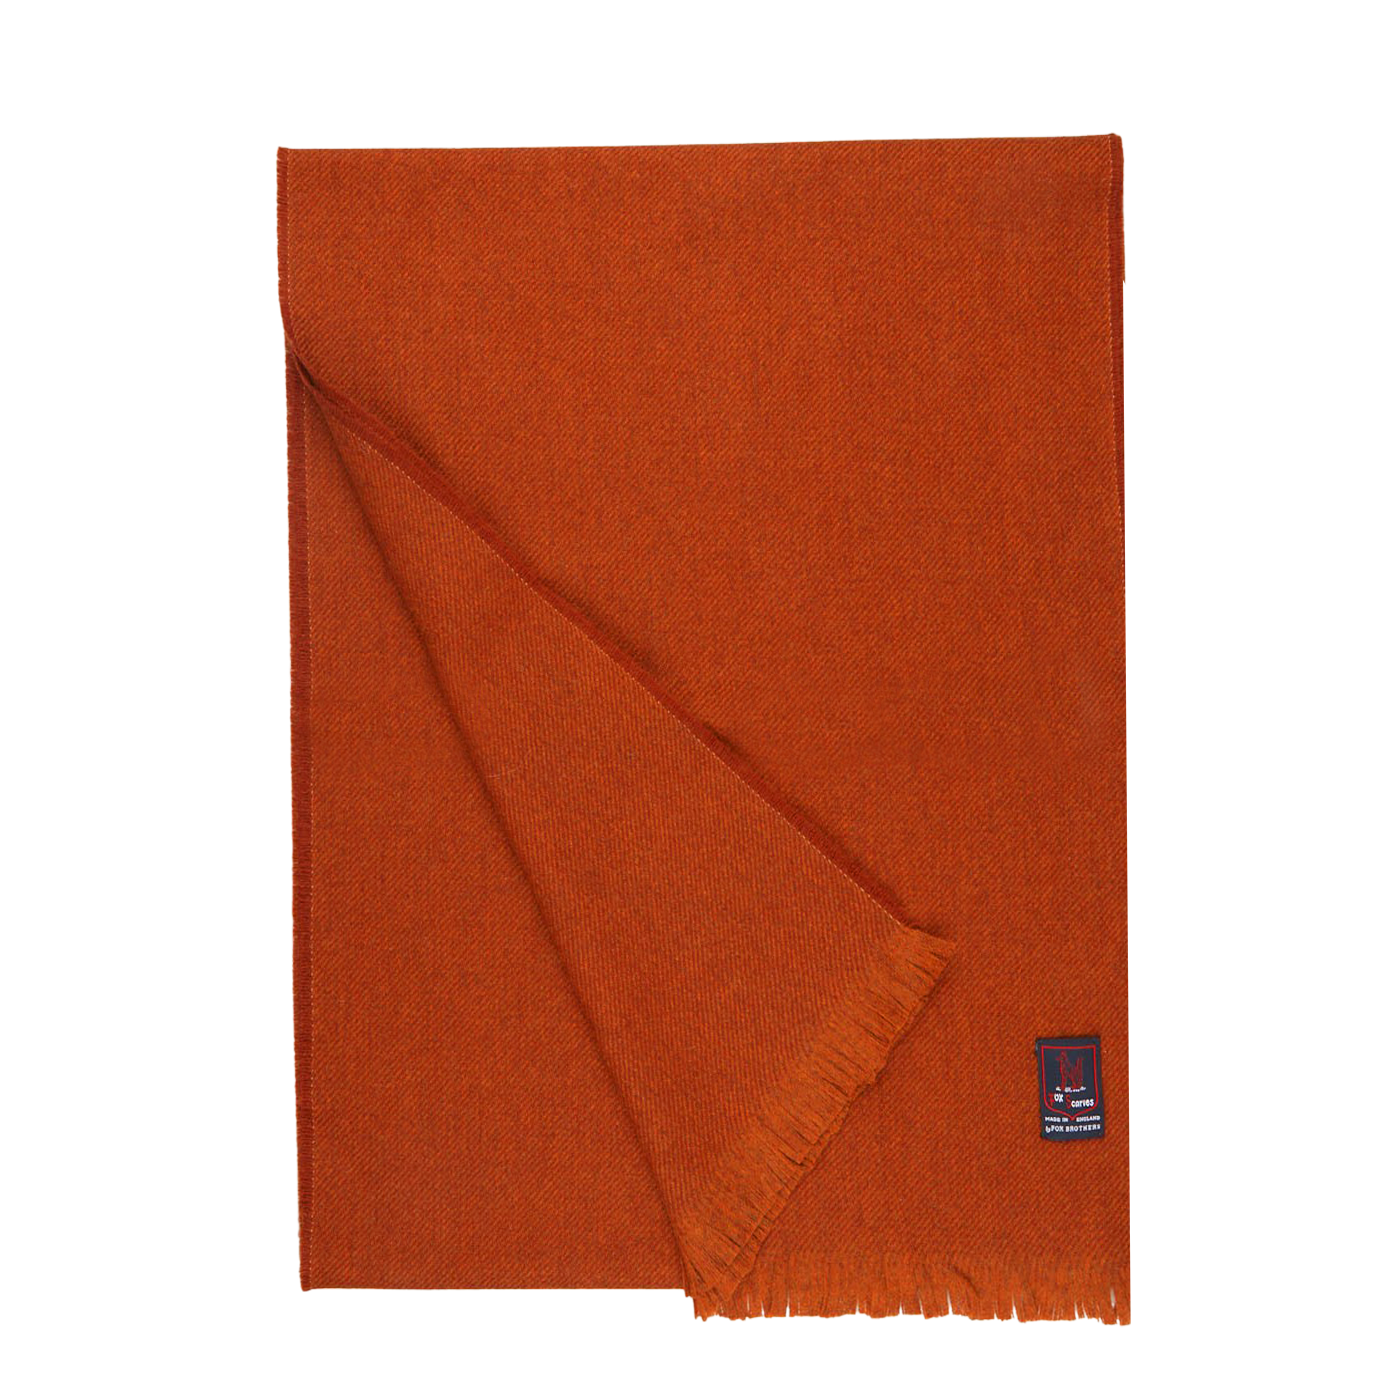 A Burnt Sienna Merino Wool Cashmere Scarf made by Fox Brothers, with fringes on a white background.